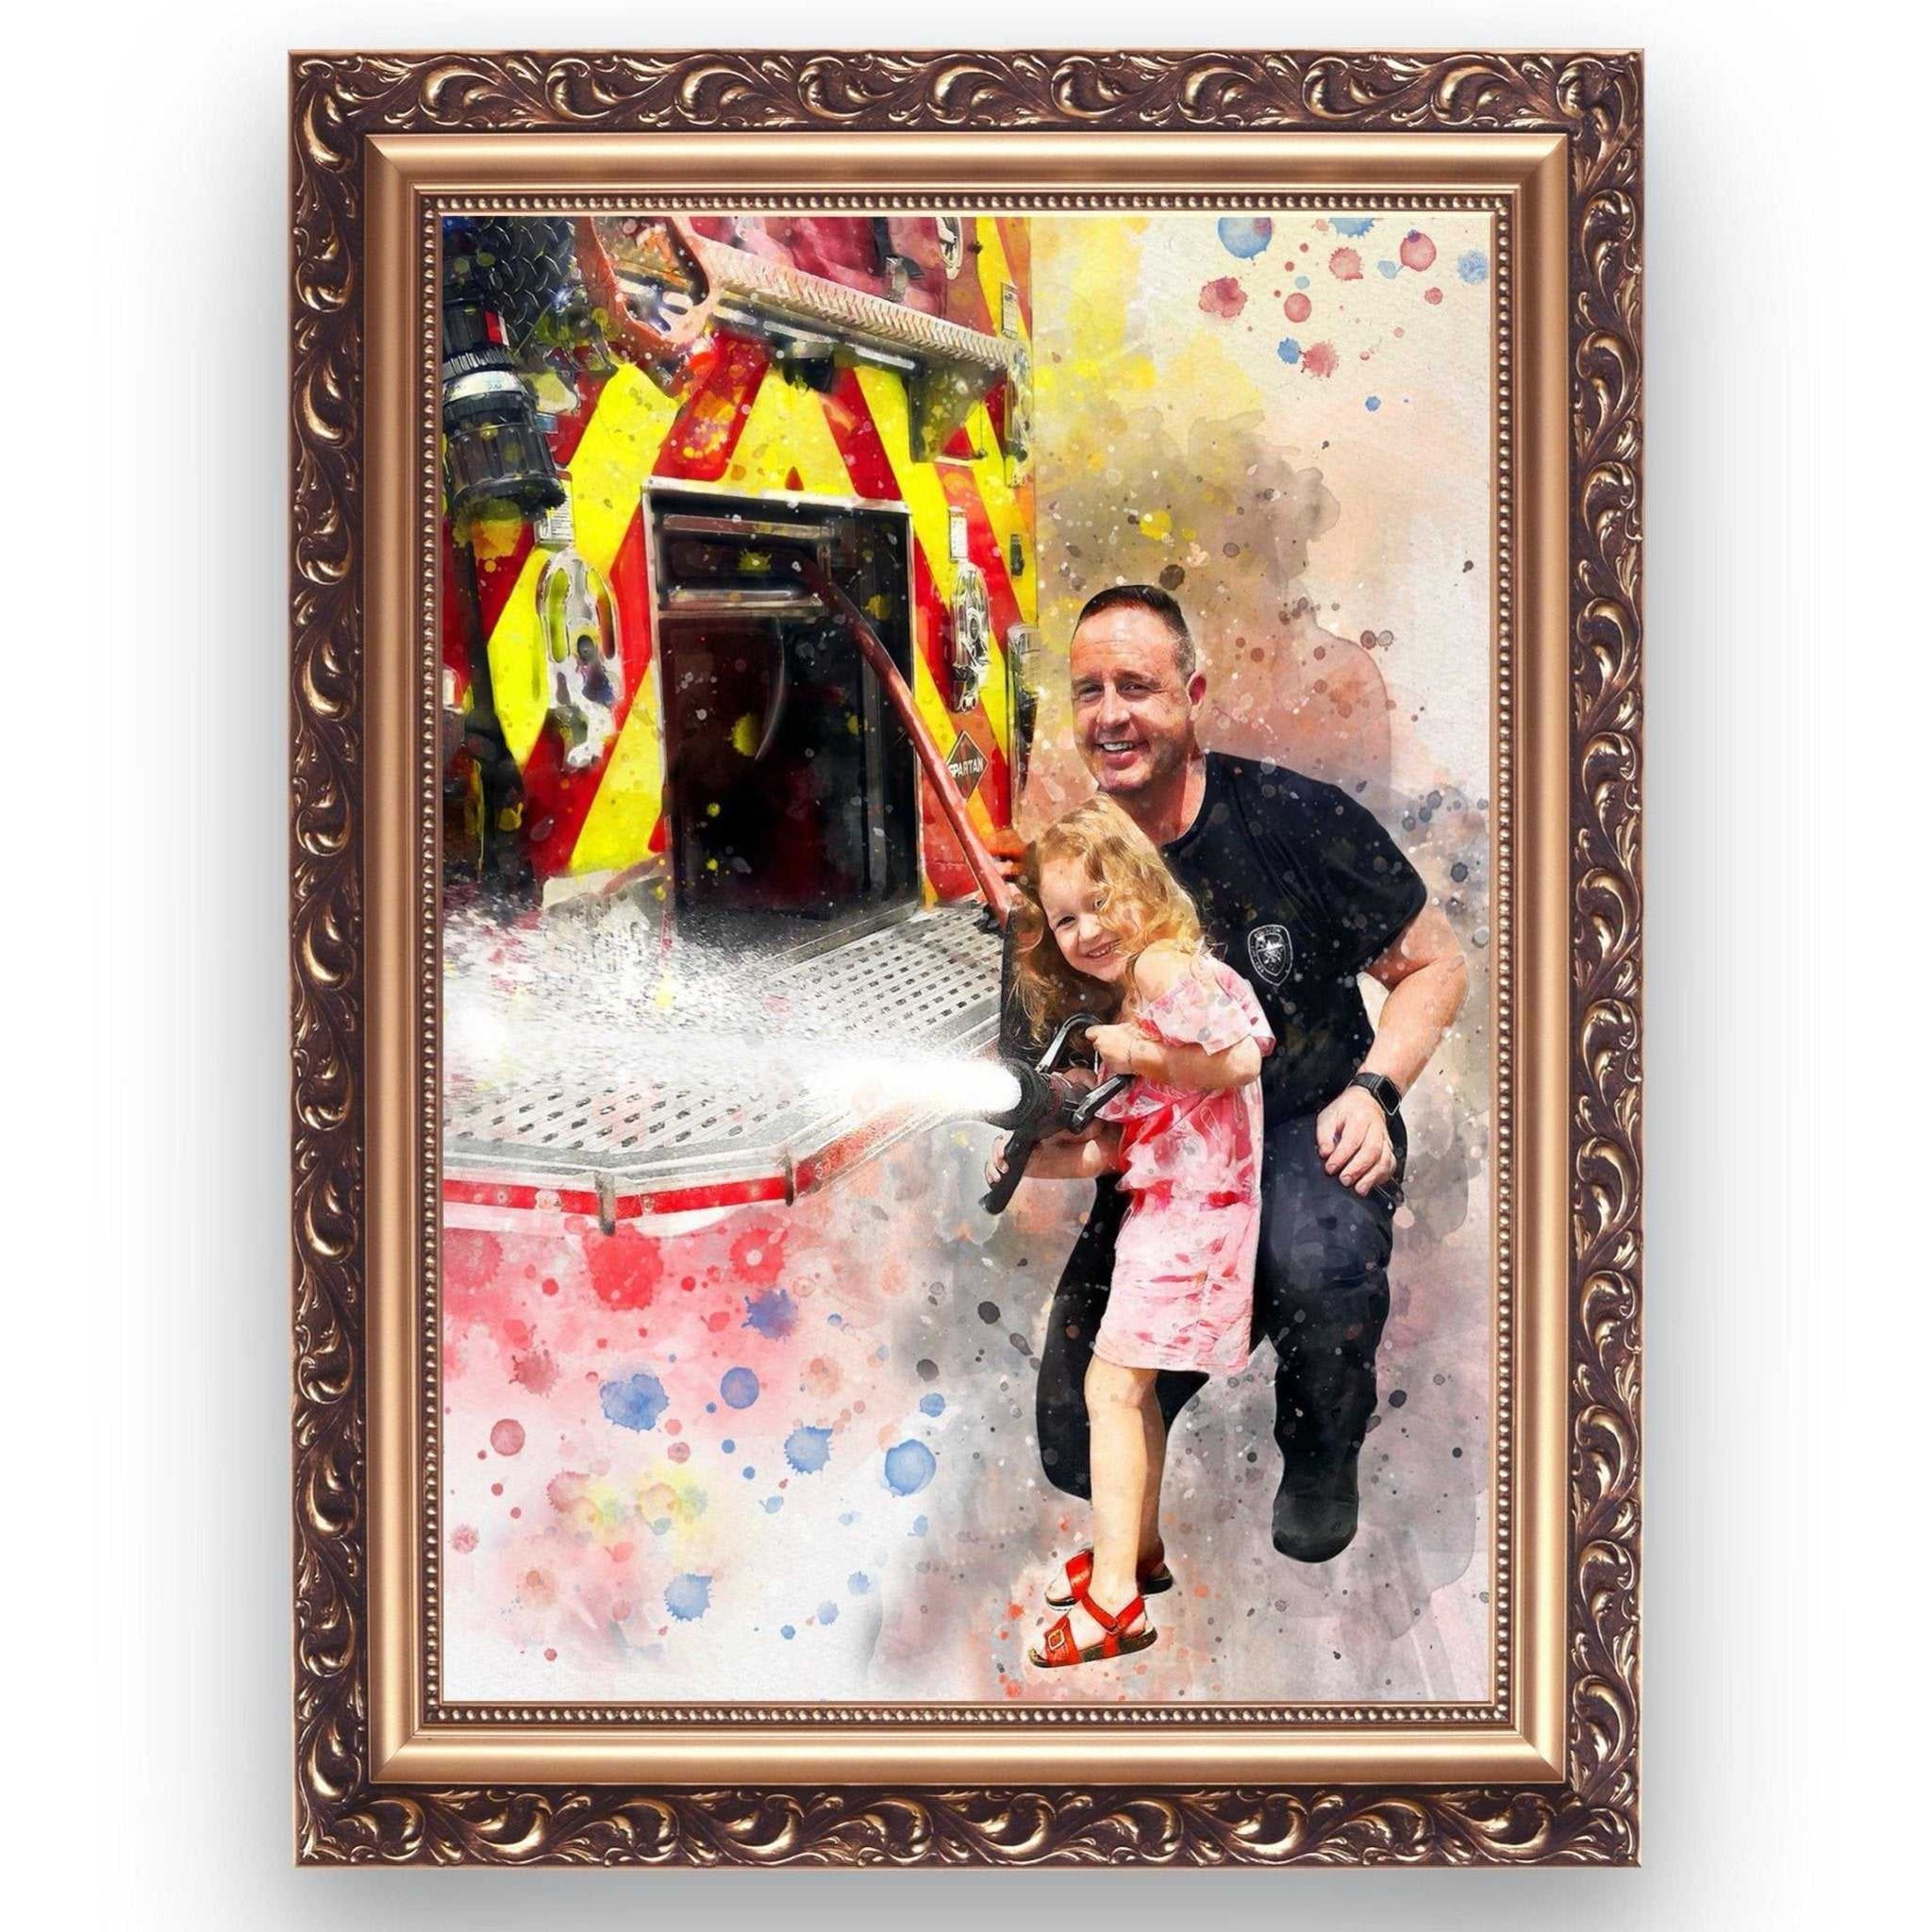 Firefighter Appreciation Day | Firefighter Gift | Fire Department Gifts | Firefighter Presents Ideas - FromPicToArt